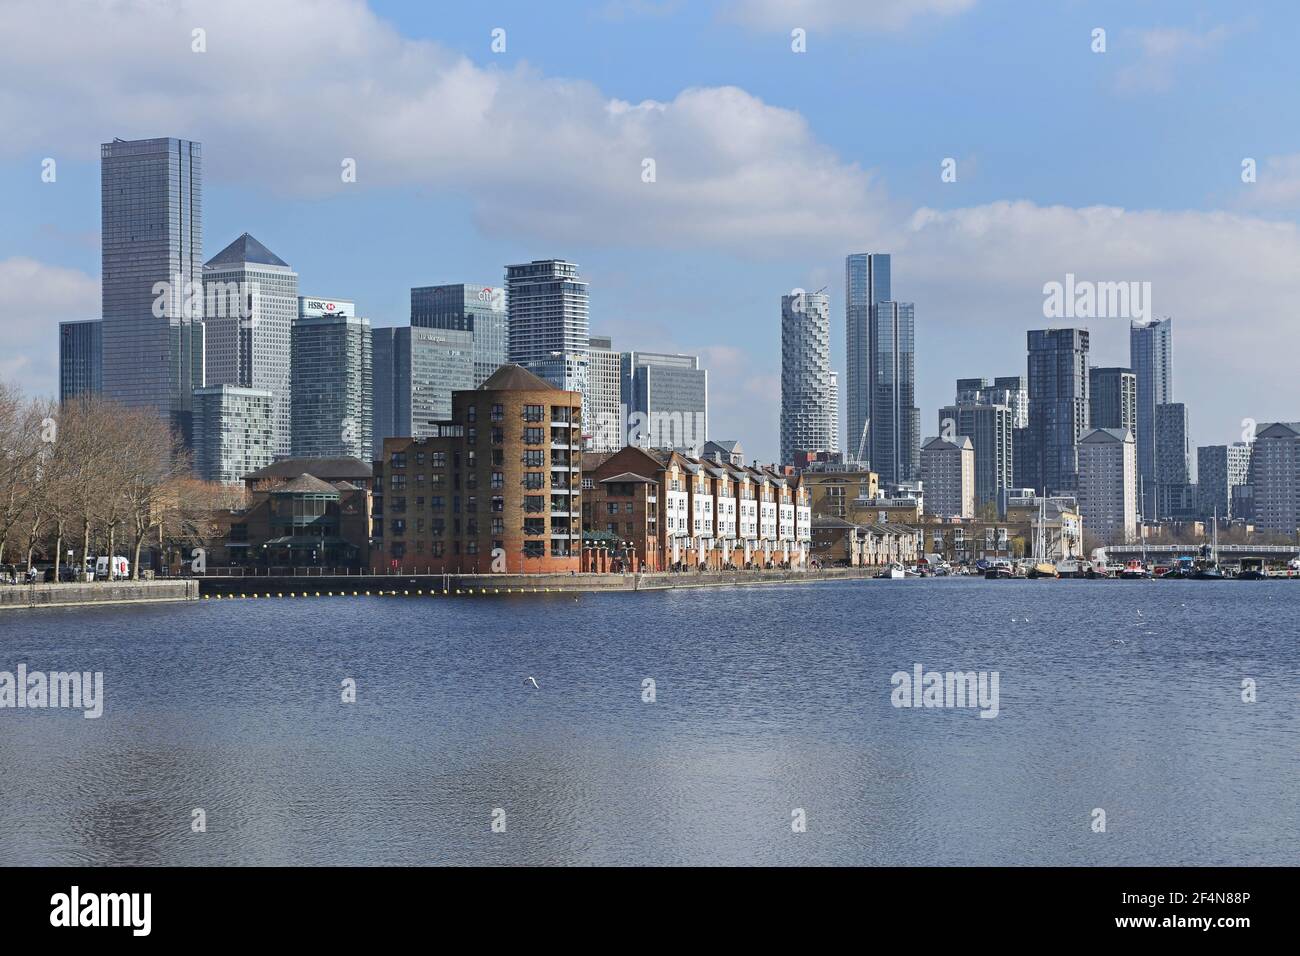 Waterfront housing in Greenland Dock, Rotherhithe, London, UK. Part of the  old Surrey Docks redeveloped in the 1980s. Canary Wharf towers beyond. Stock Photo